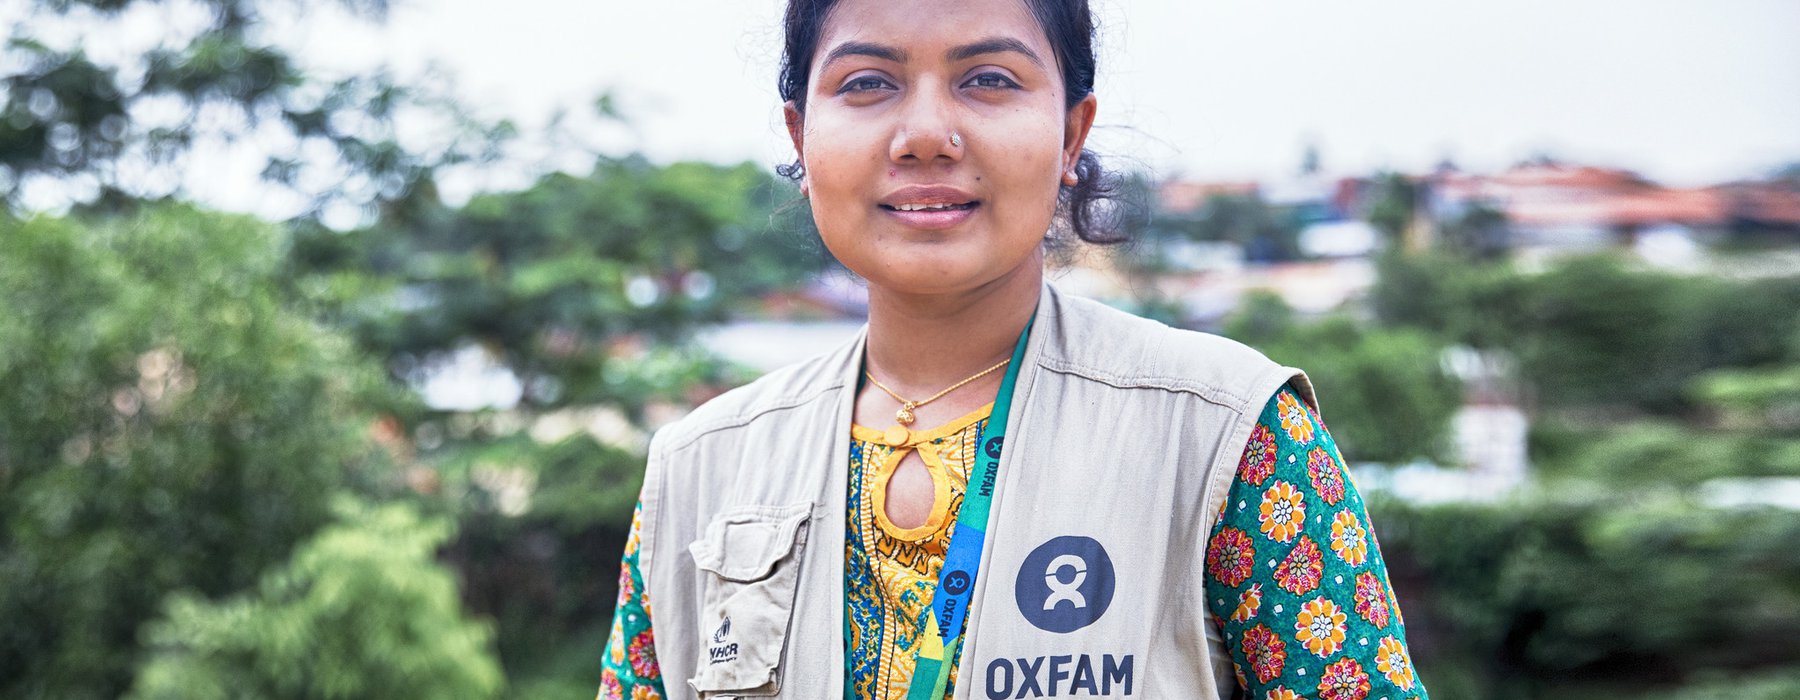 Moury is an Oxfam Public Health Promotion Officer in the Rohingya refugee camp in Cox's Bazar, Bangladesh. Credit: Fabeha Monir/Oxfam